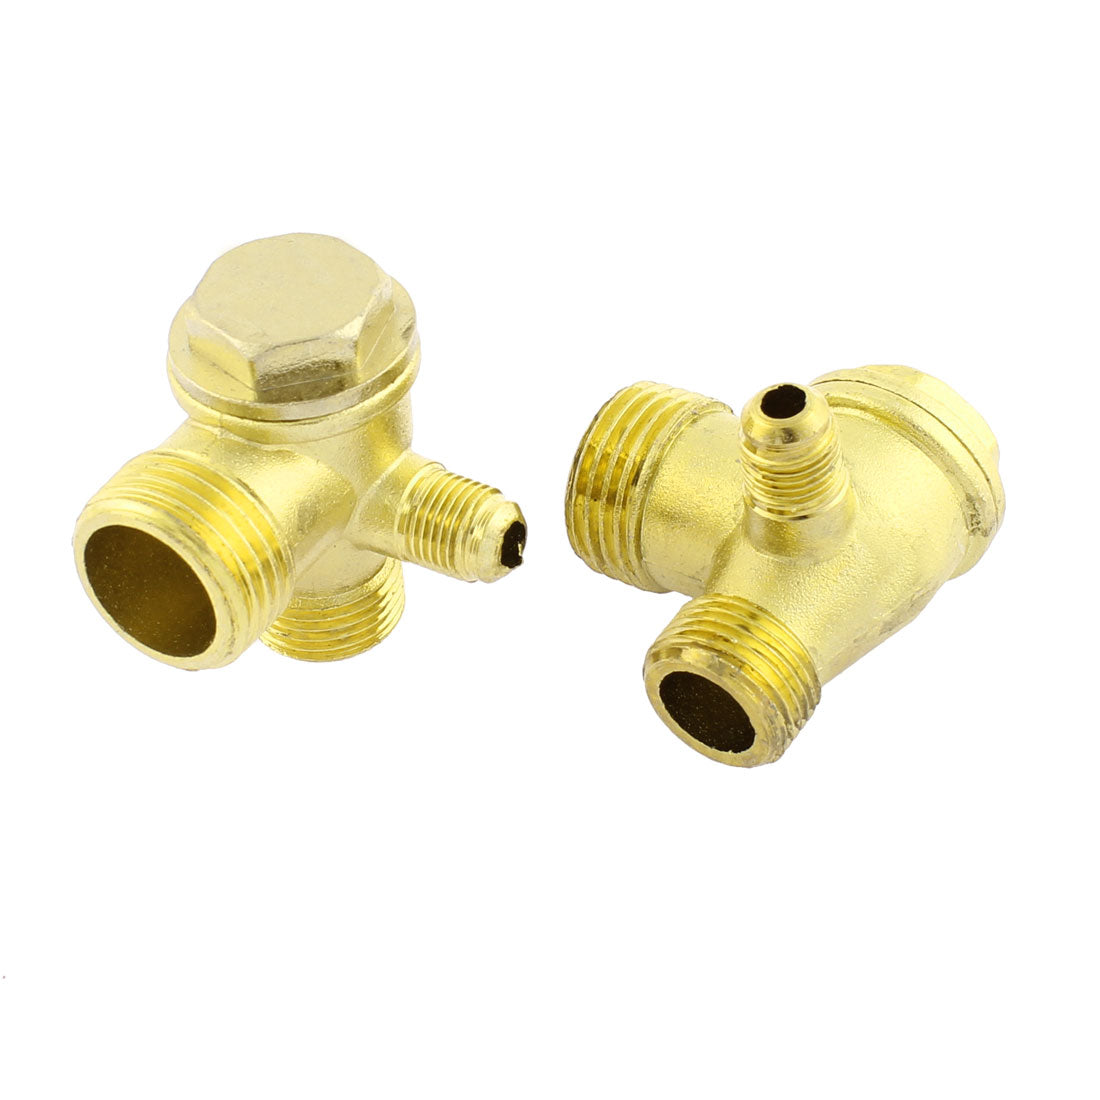 uxcell Uxcell Air Compressor 3 Port Brass Tone Male Thread Check Valve Connector 2pcs